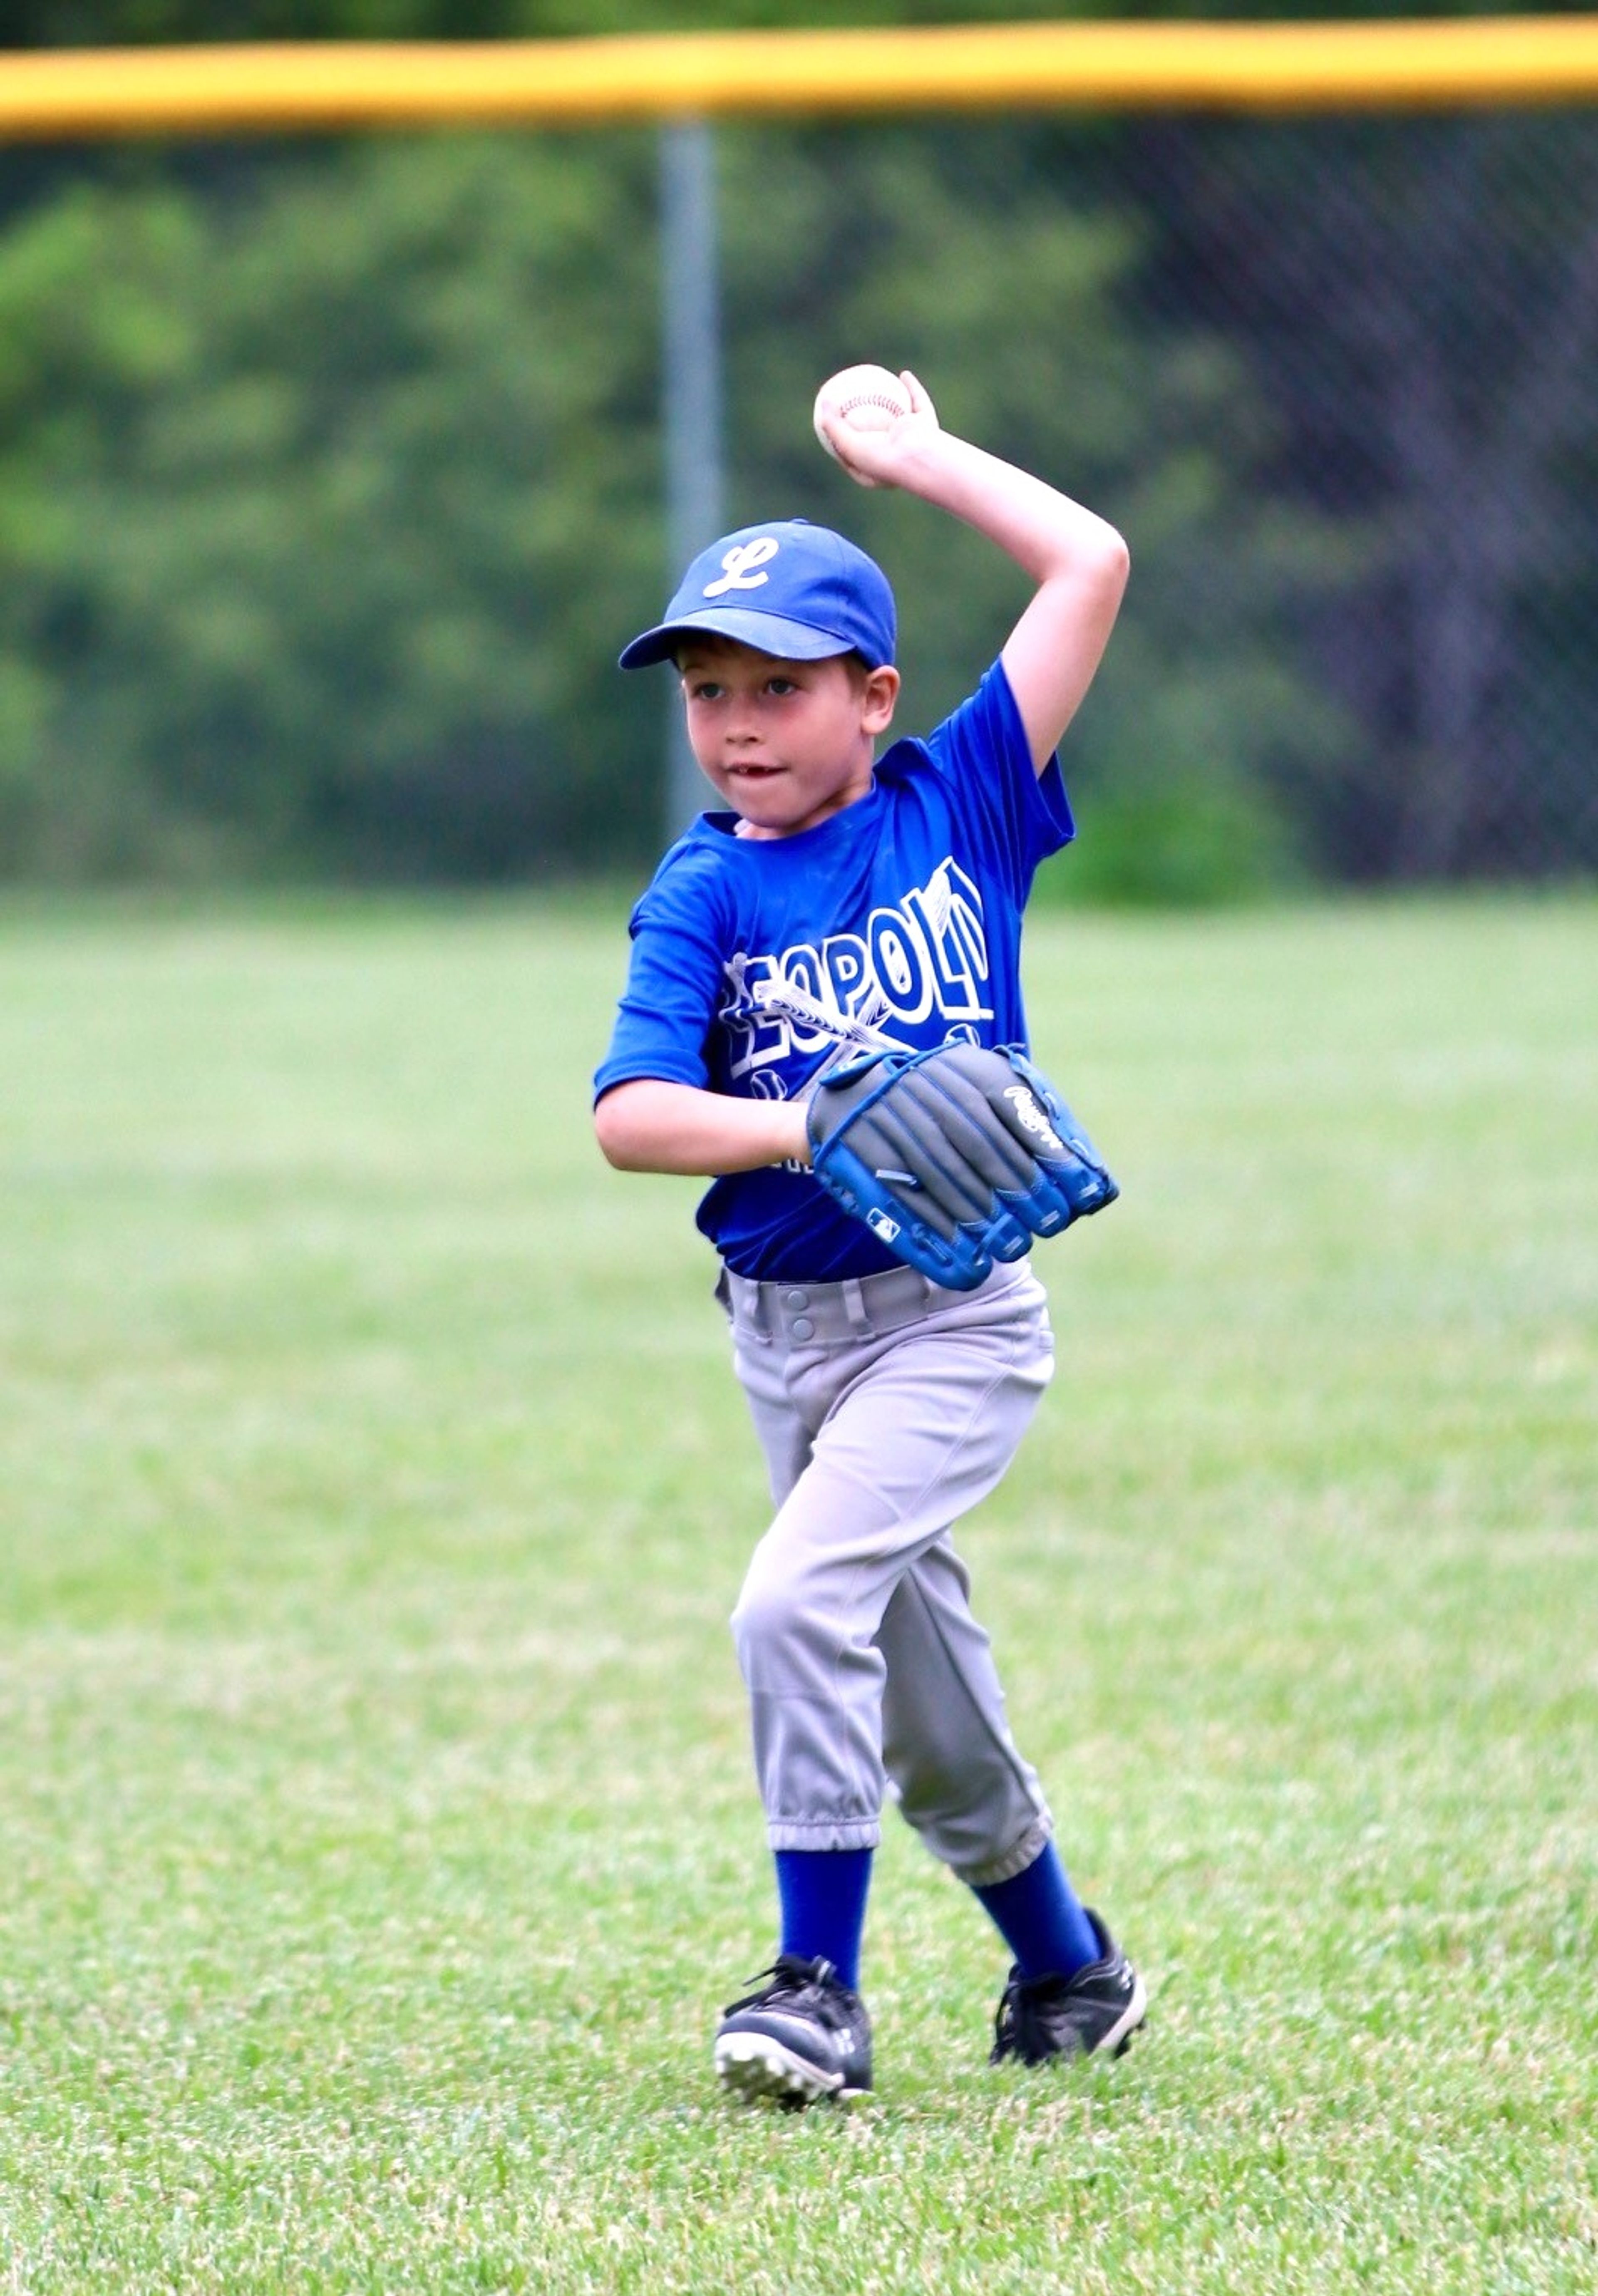 
8U baseball player Ben Francis throws a ball to the infield.